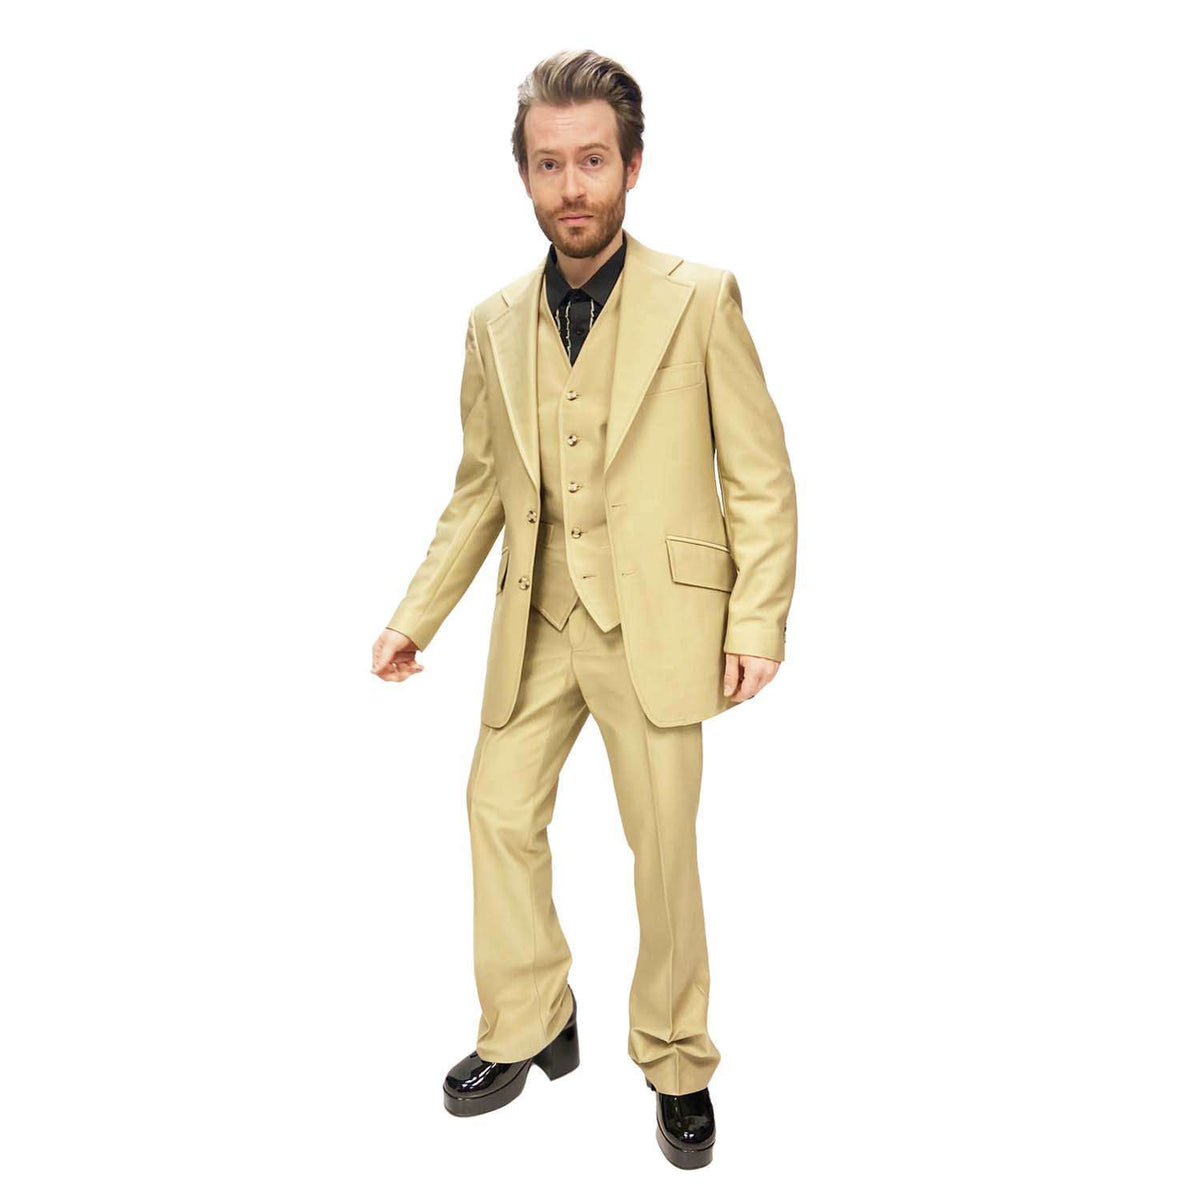 Deluxe 1970's Golden Boy House Party Suit Adult Costume